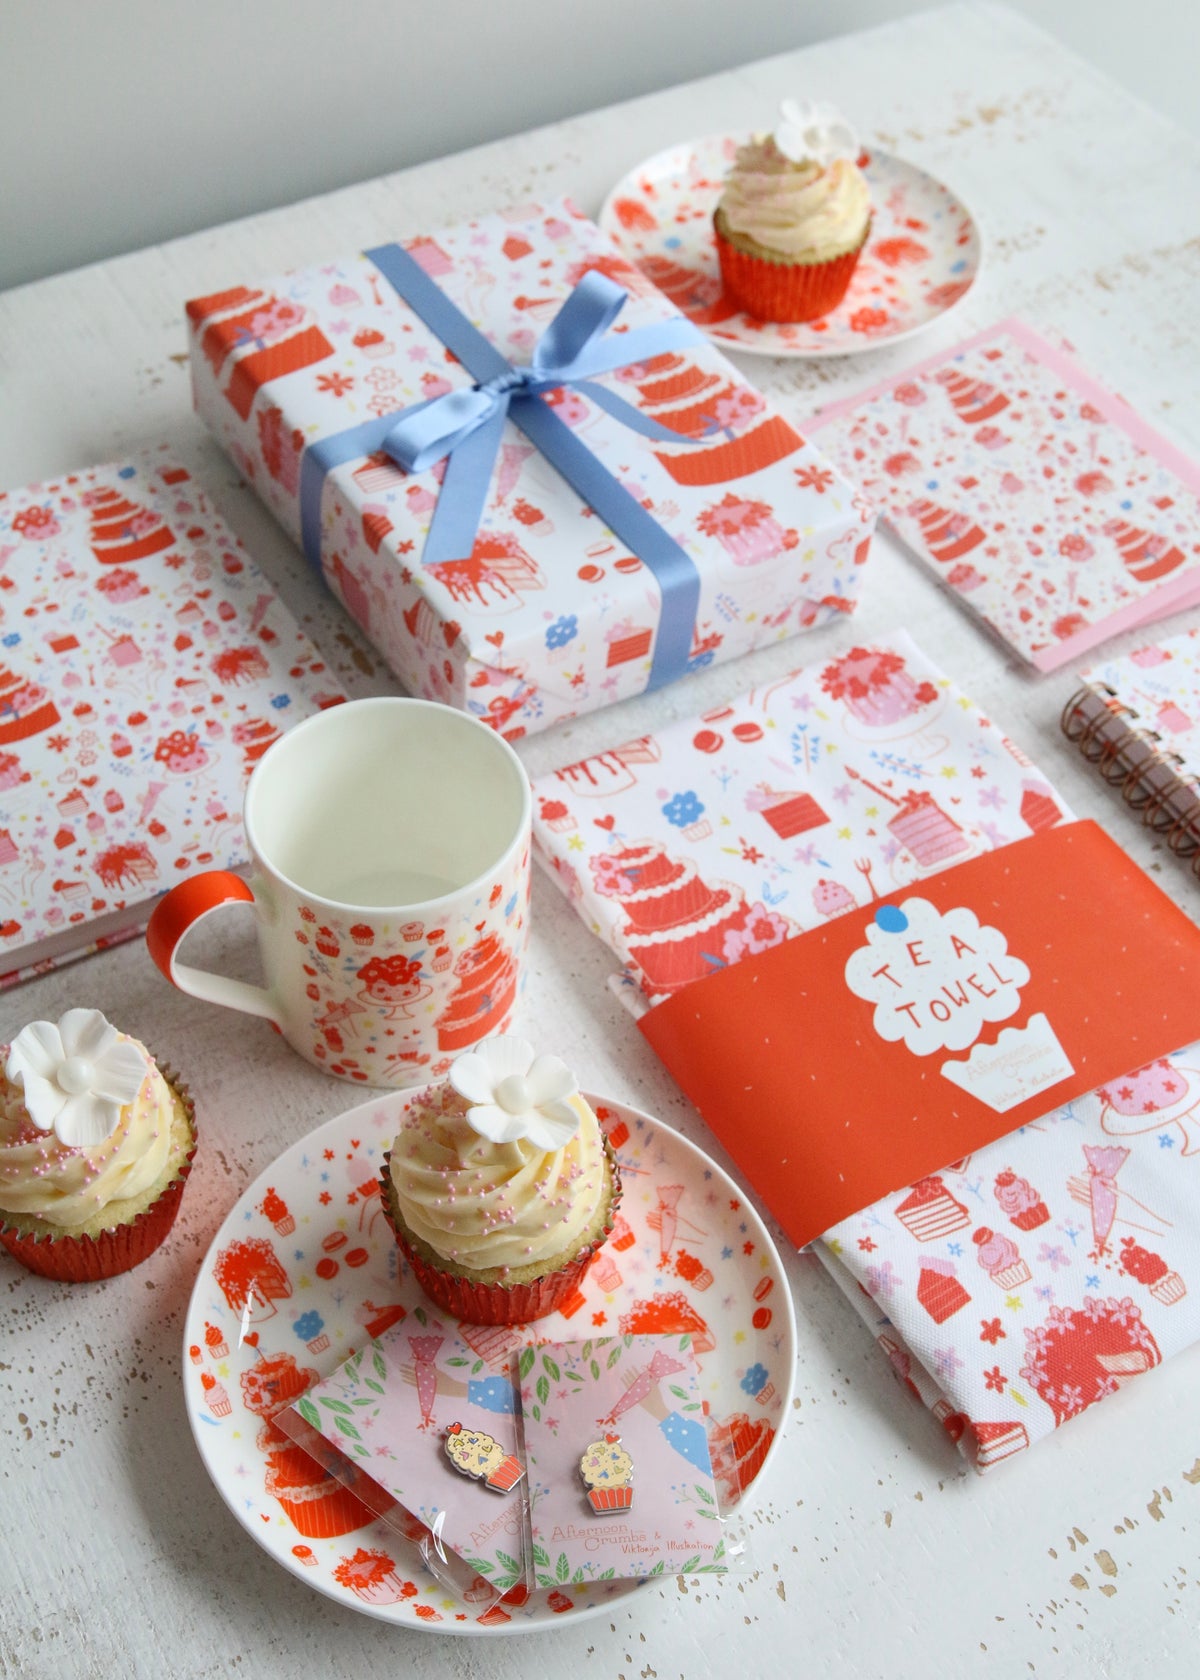 'Spreading Sweetness' Gift Collection